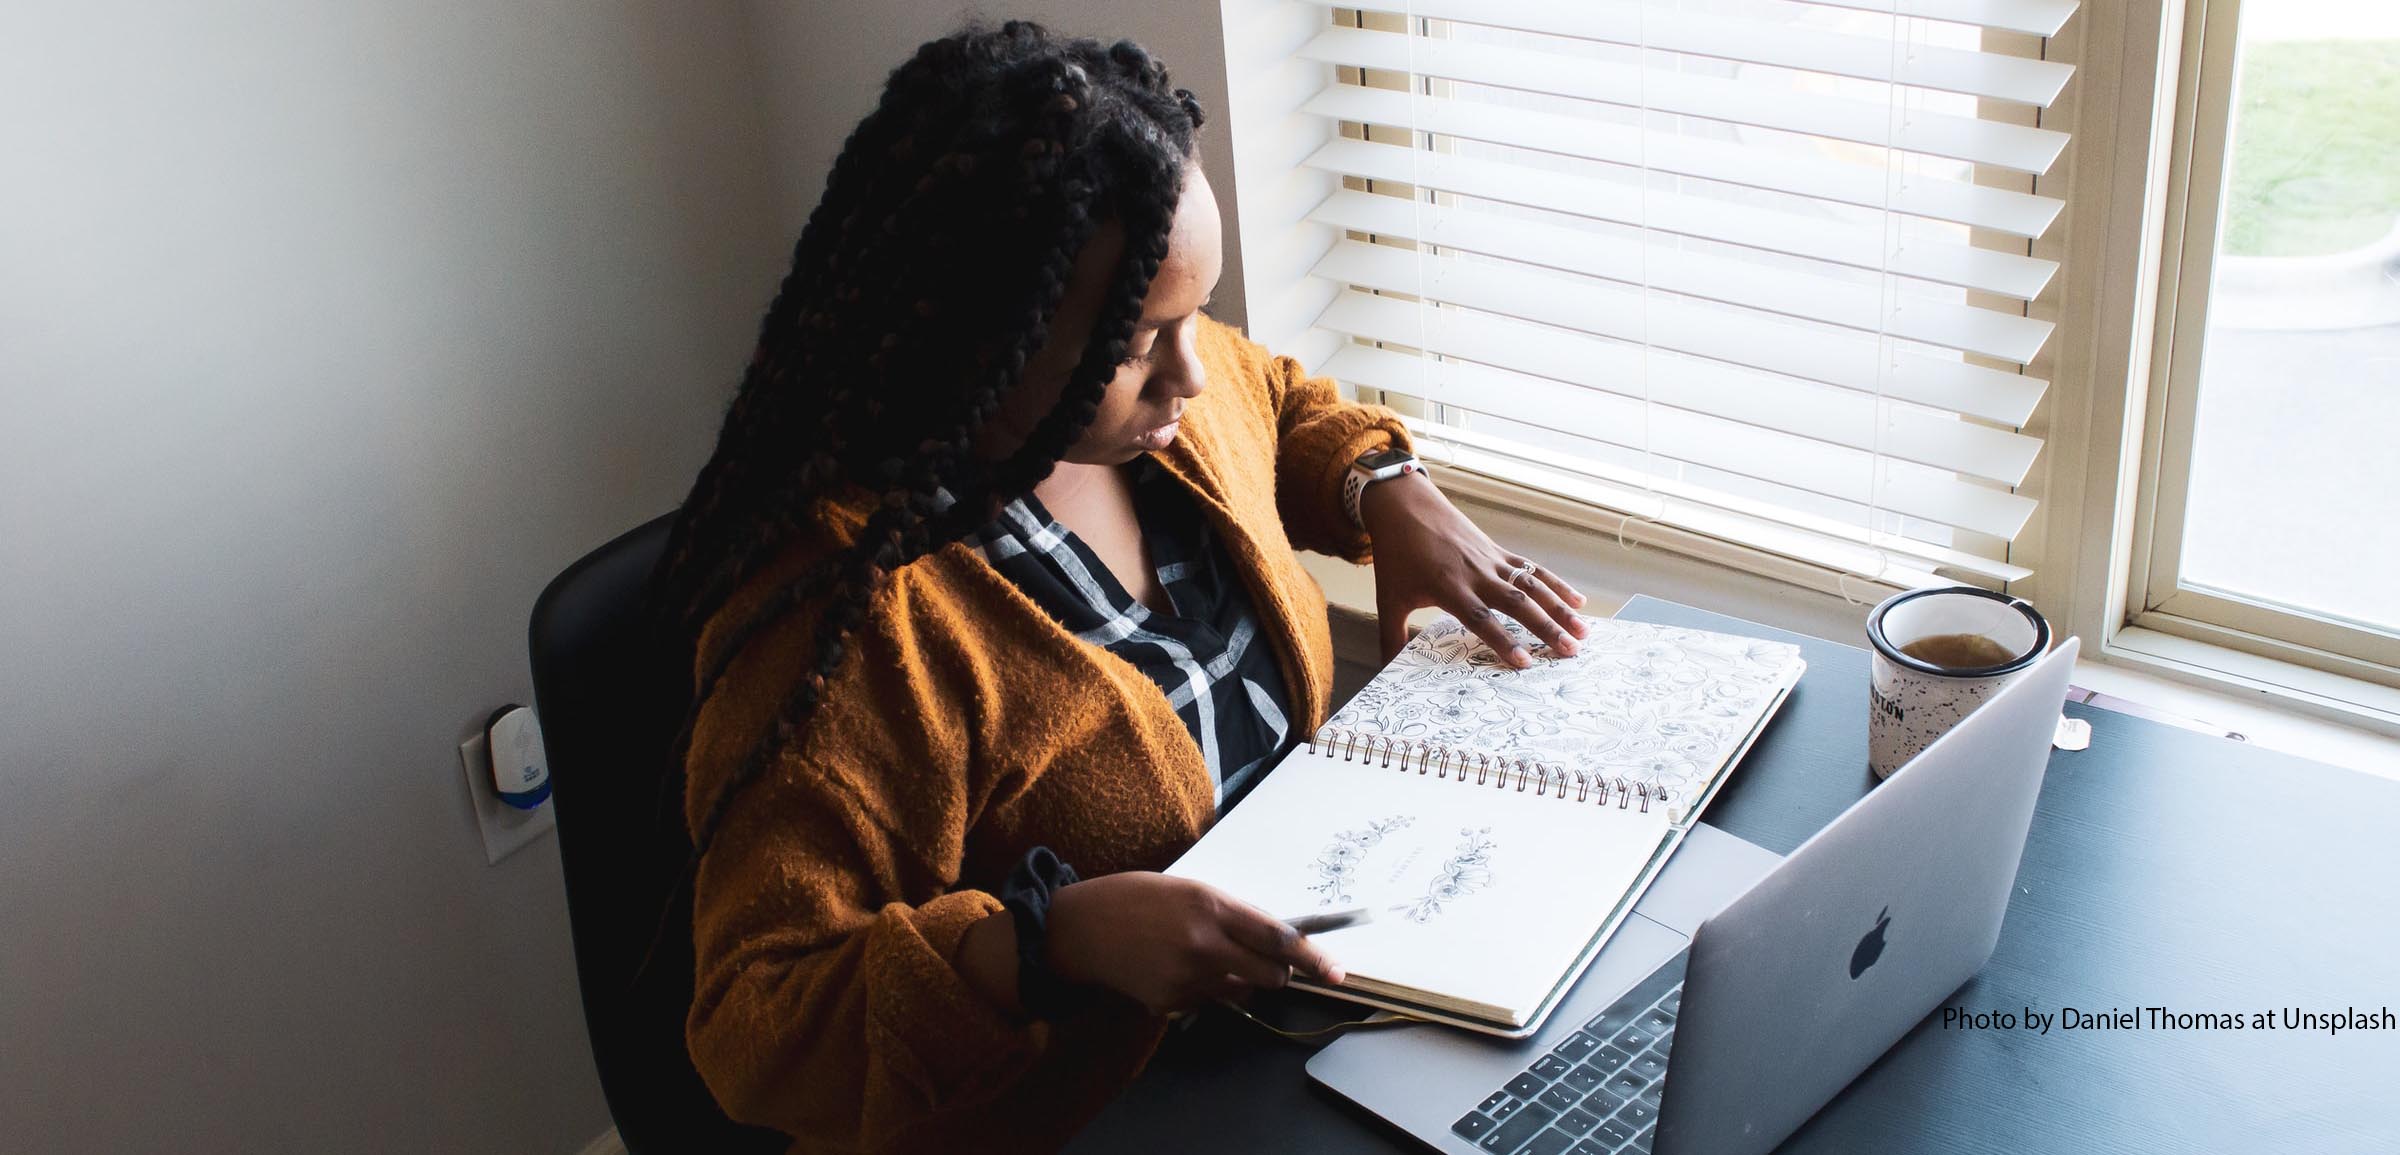 Black woman sitting at computer looking out window